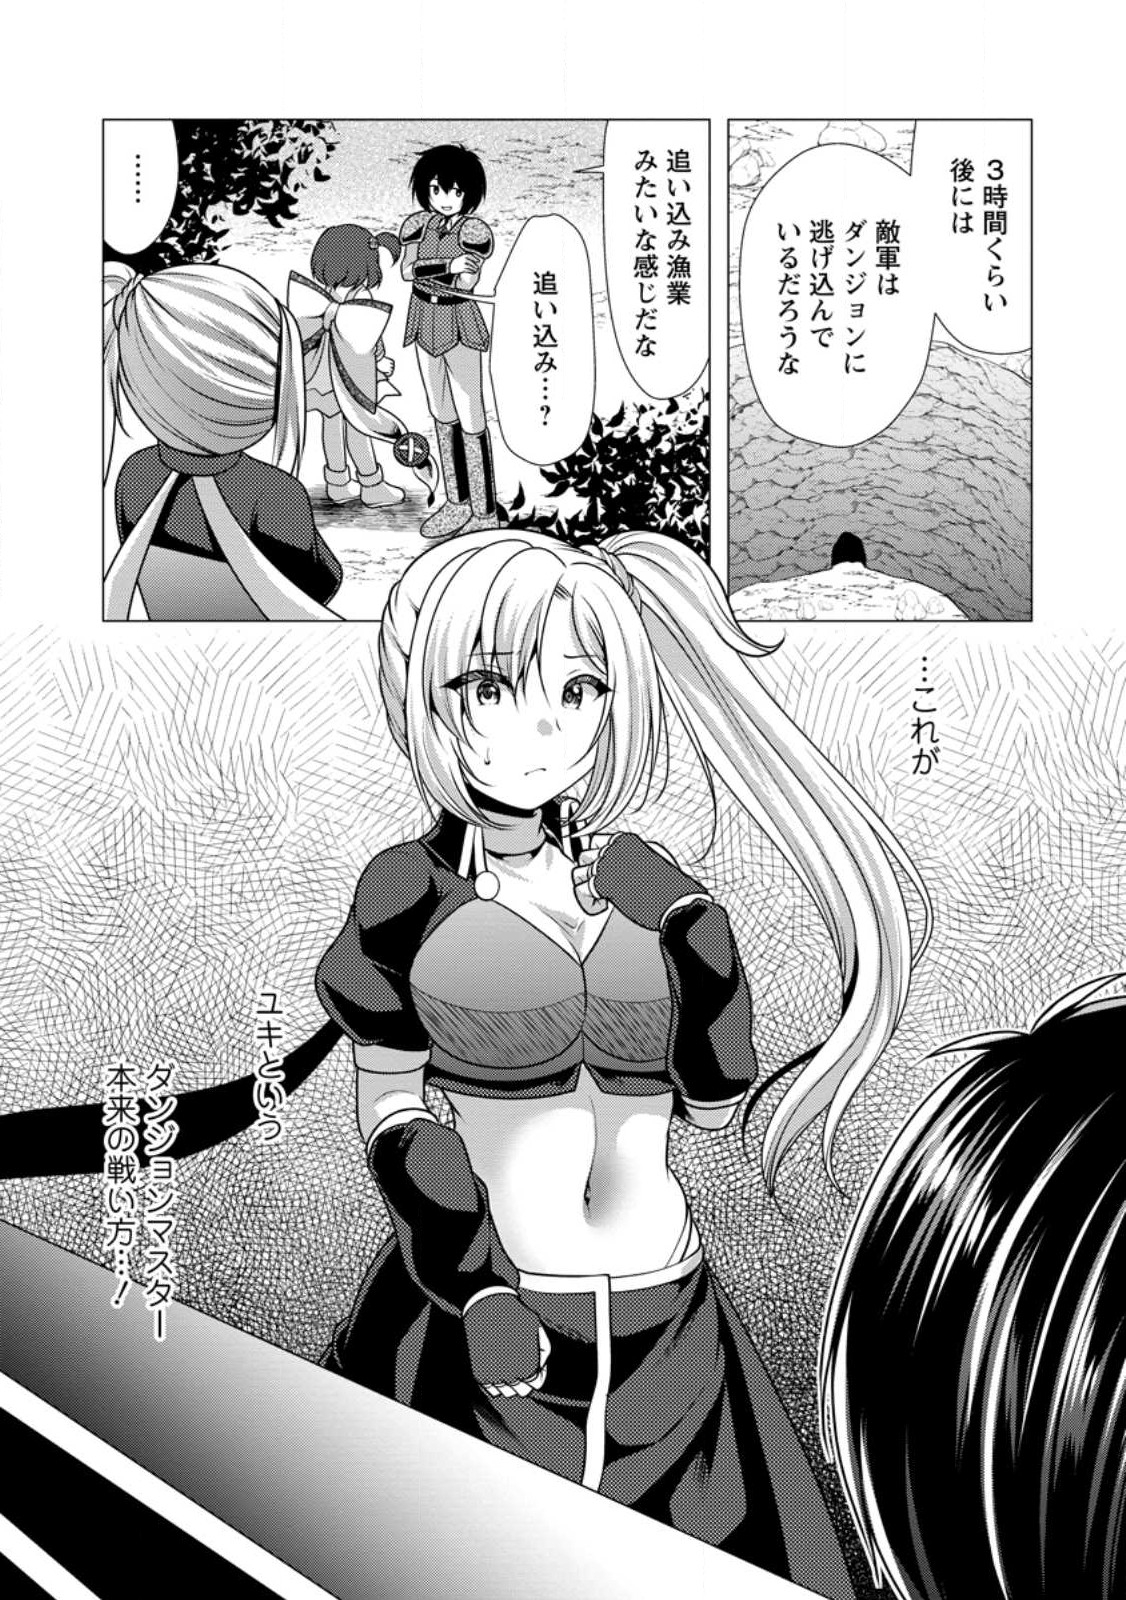 Hisshou Dungeon Unei Houhou - Chapter 57.3 - Page 1